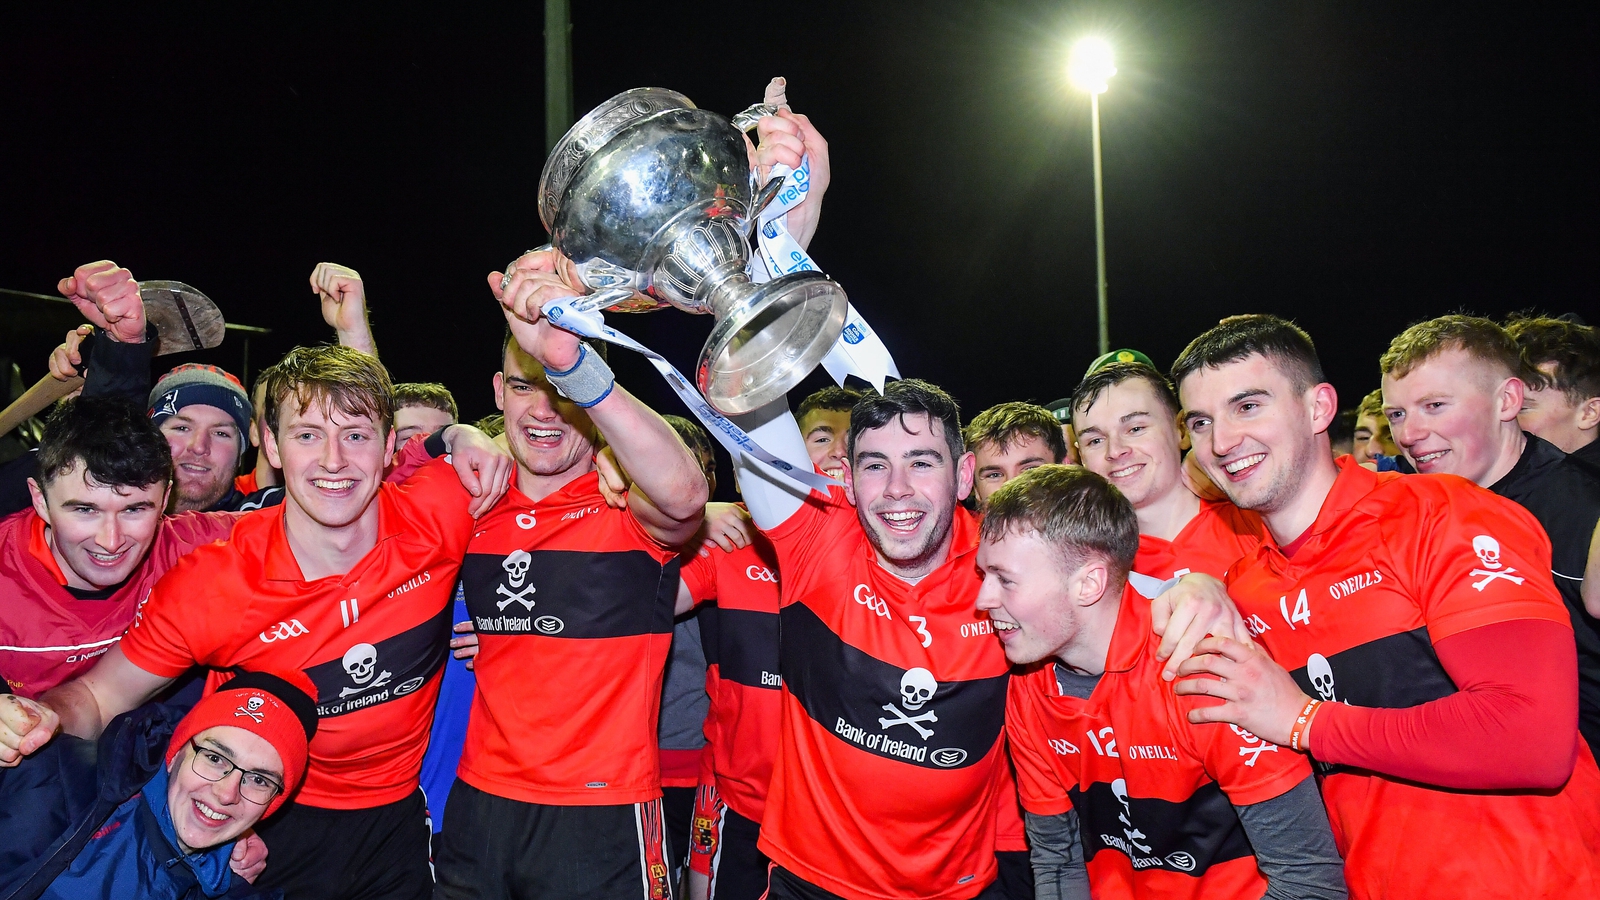 UCC pip IT Carlow to win back-to-back Fitzgibbon titles